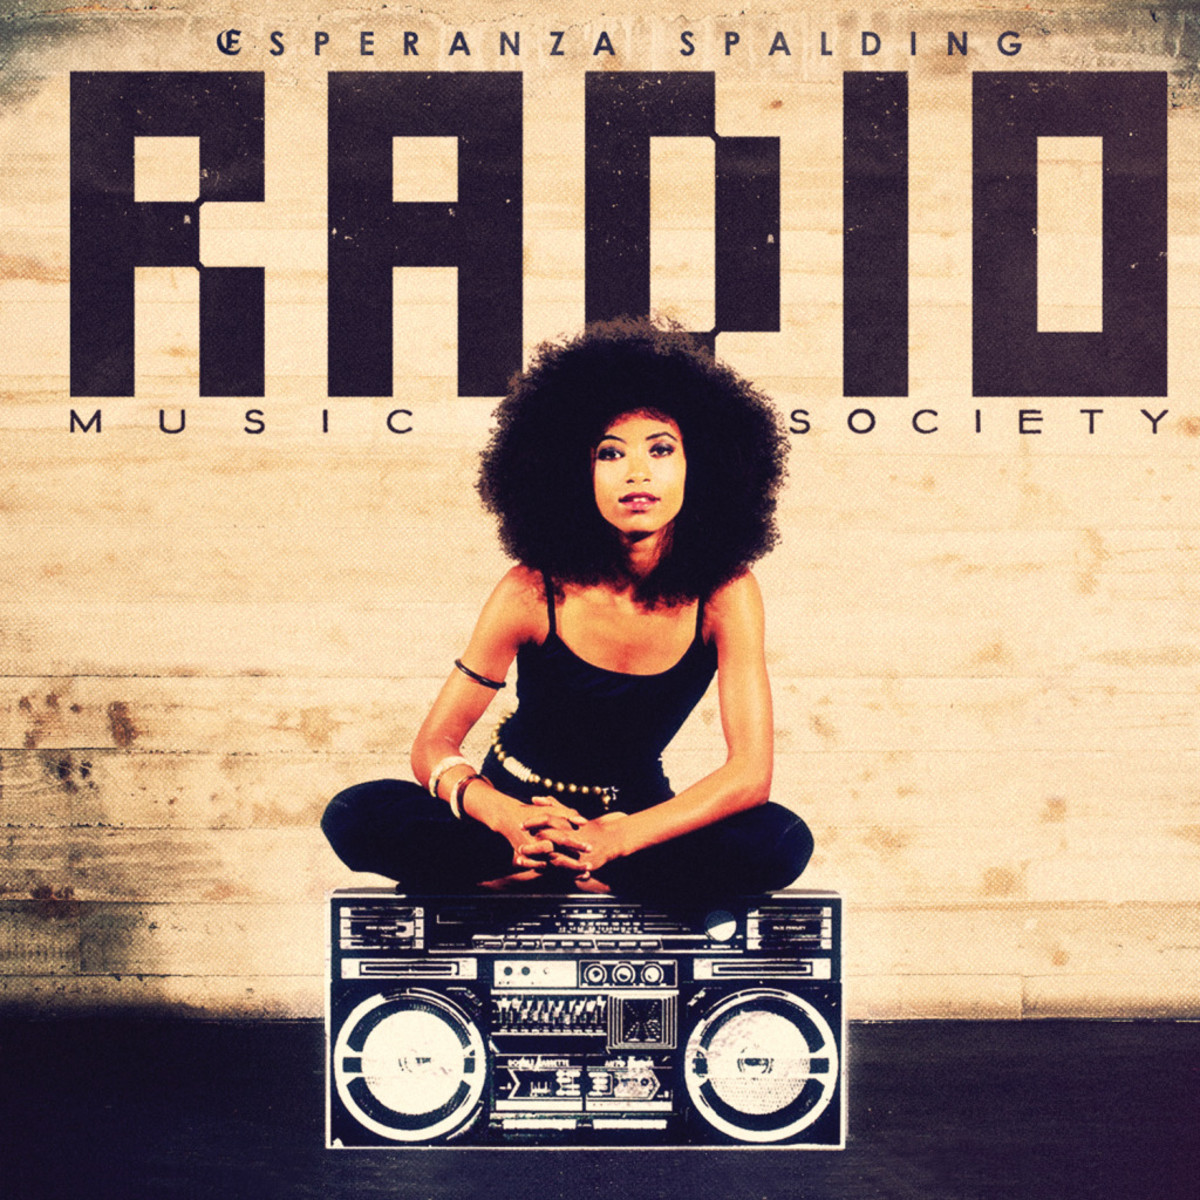 Just a girl and her radio ... I love it